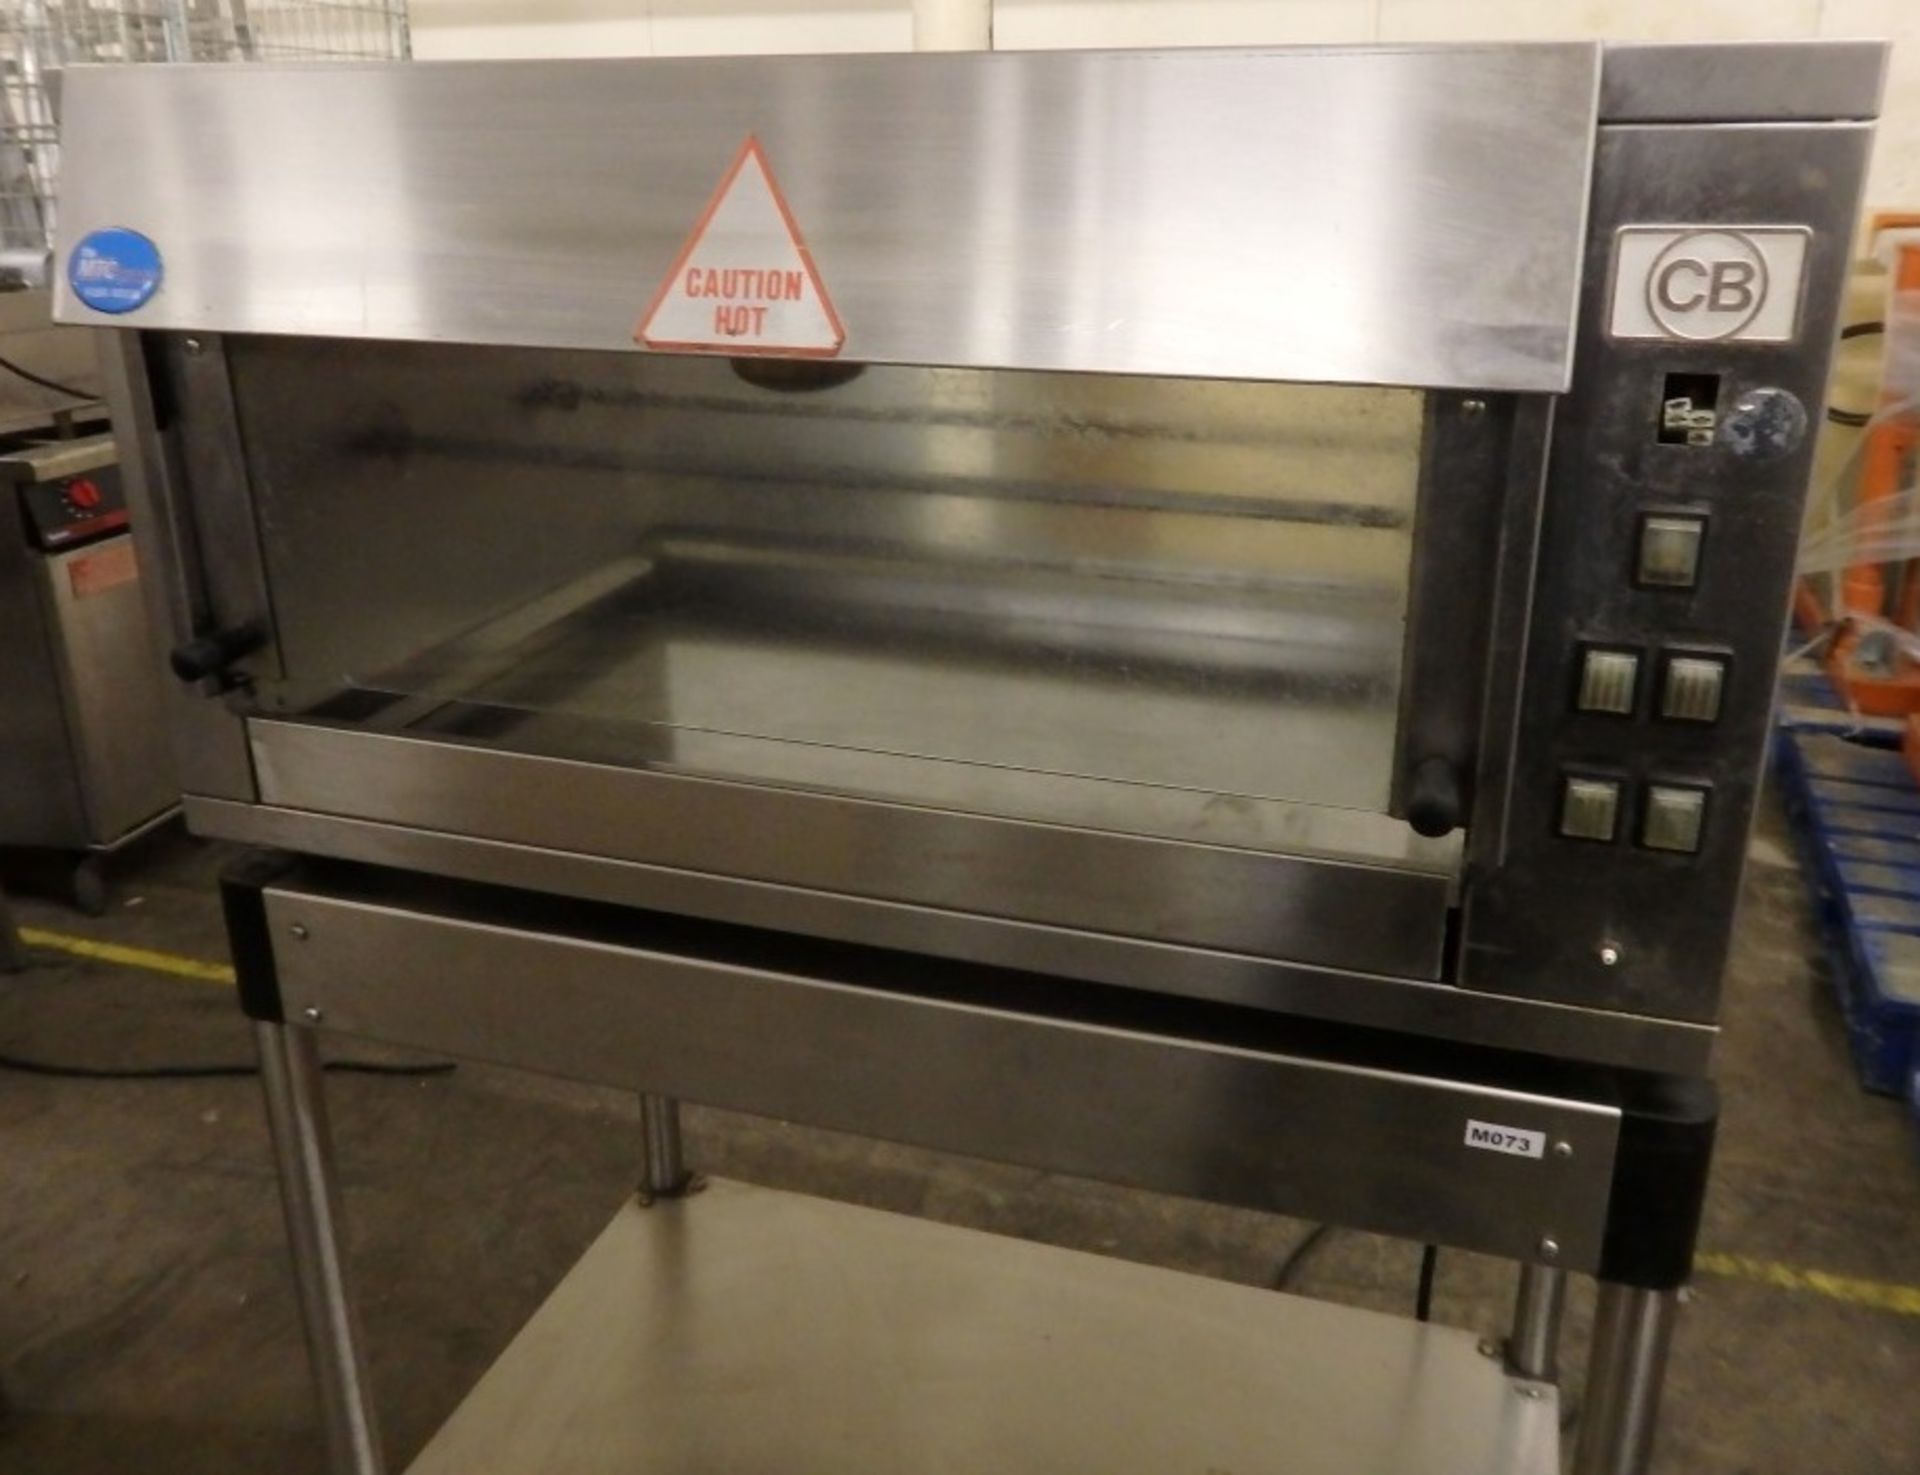 1 x Rotisserie Oven And Stand Reserve - Dimensions; Oven W90 x D56 x H47 (H137 Inc. Stand) Ref: M073 - Image 4 of 6